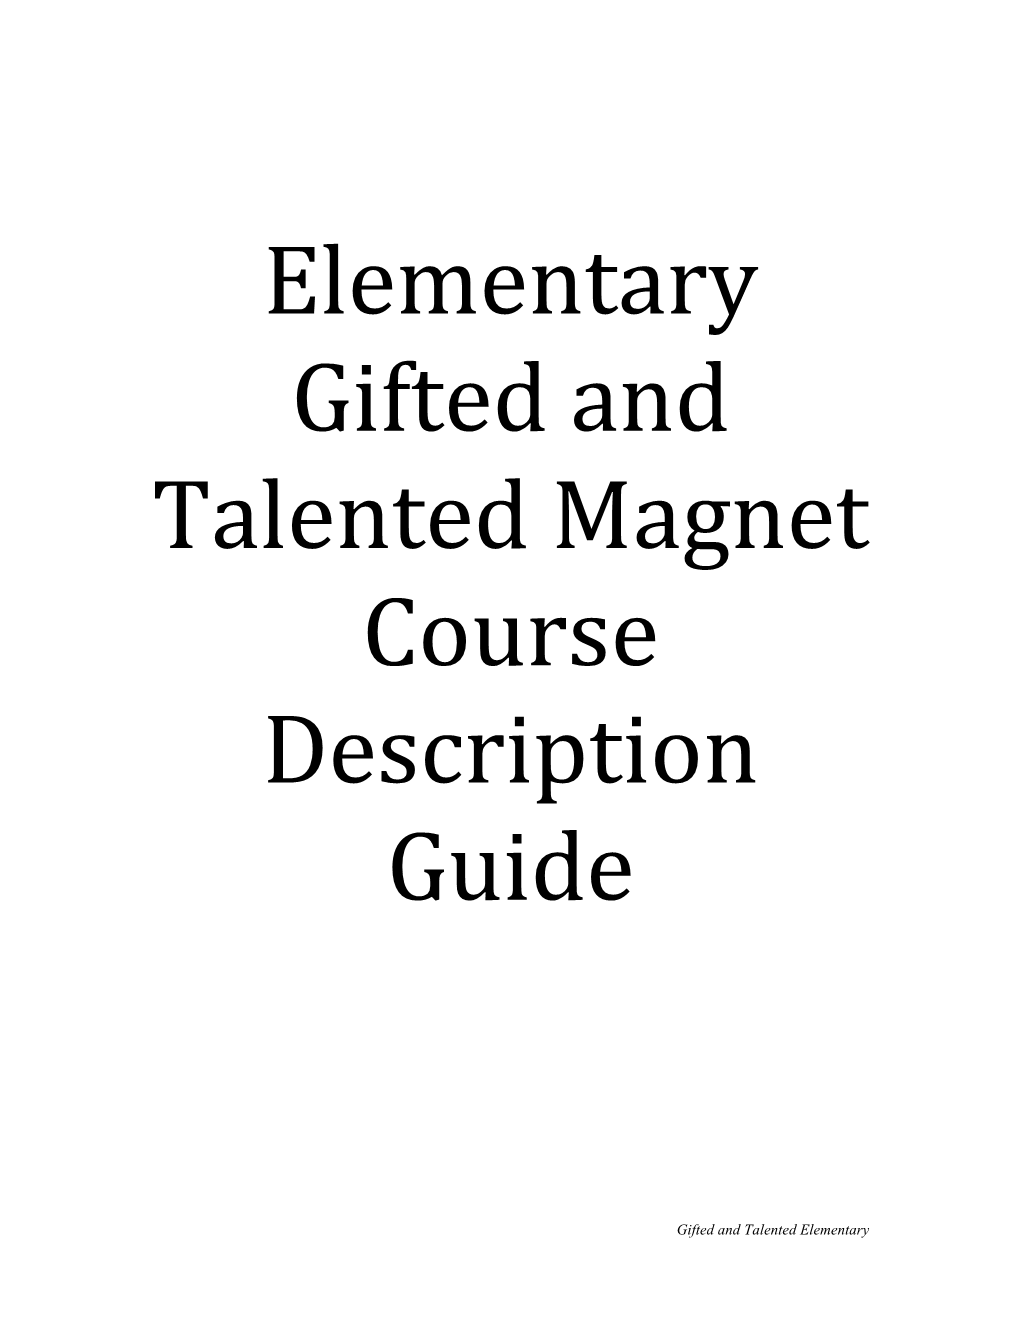 Elementary Gifted and Talented Magnet Course Description Guide